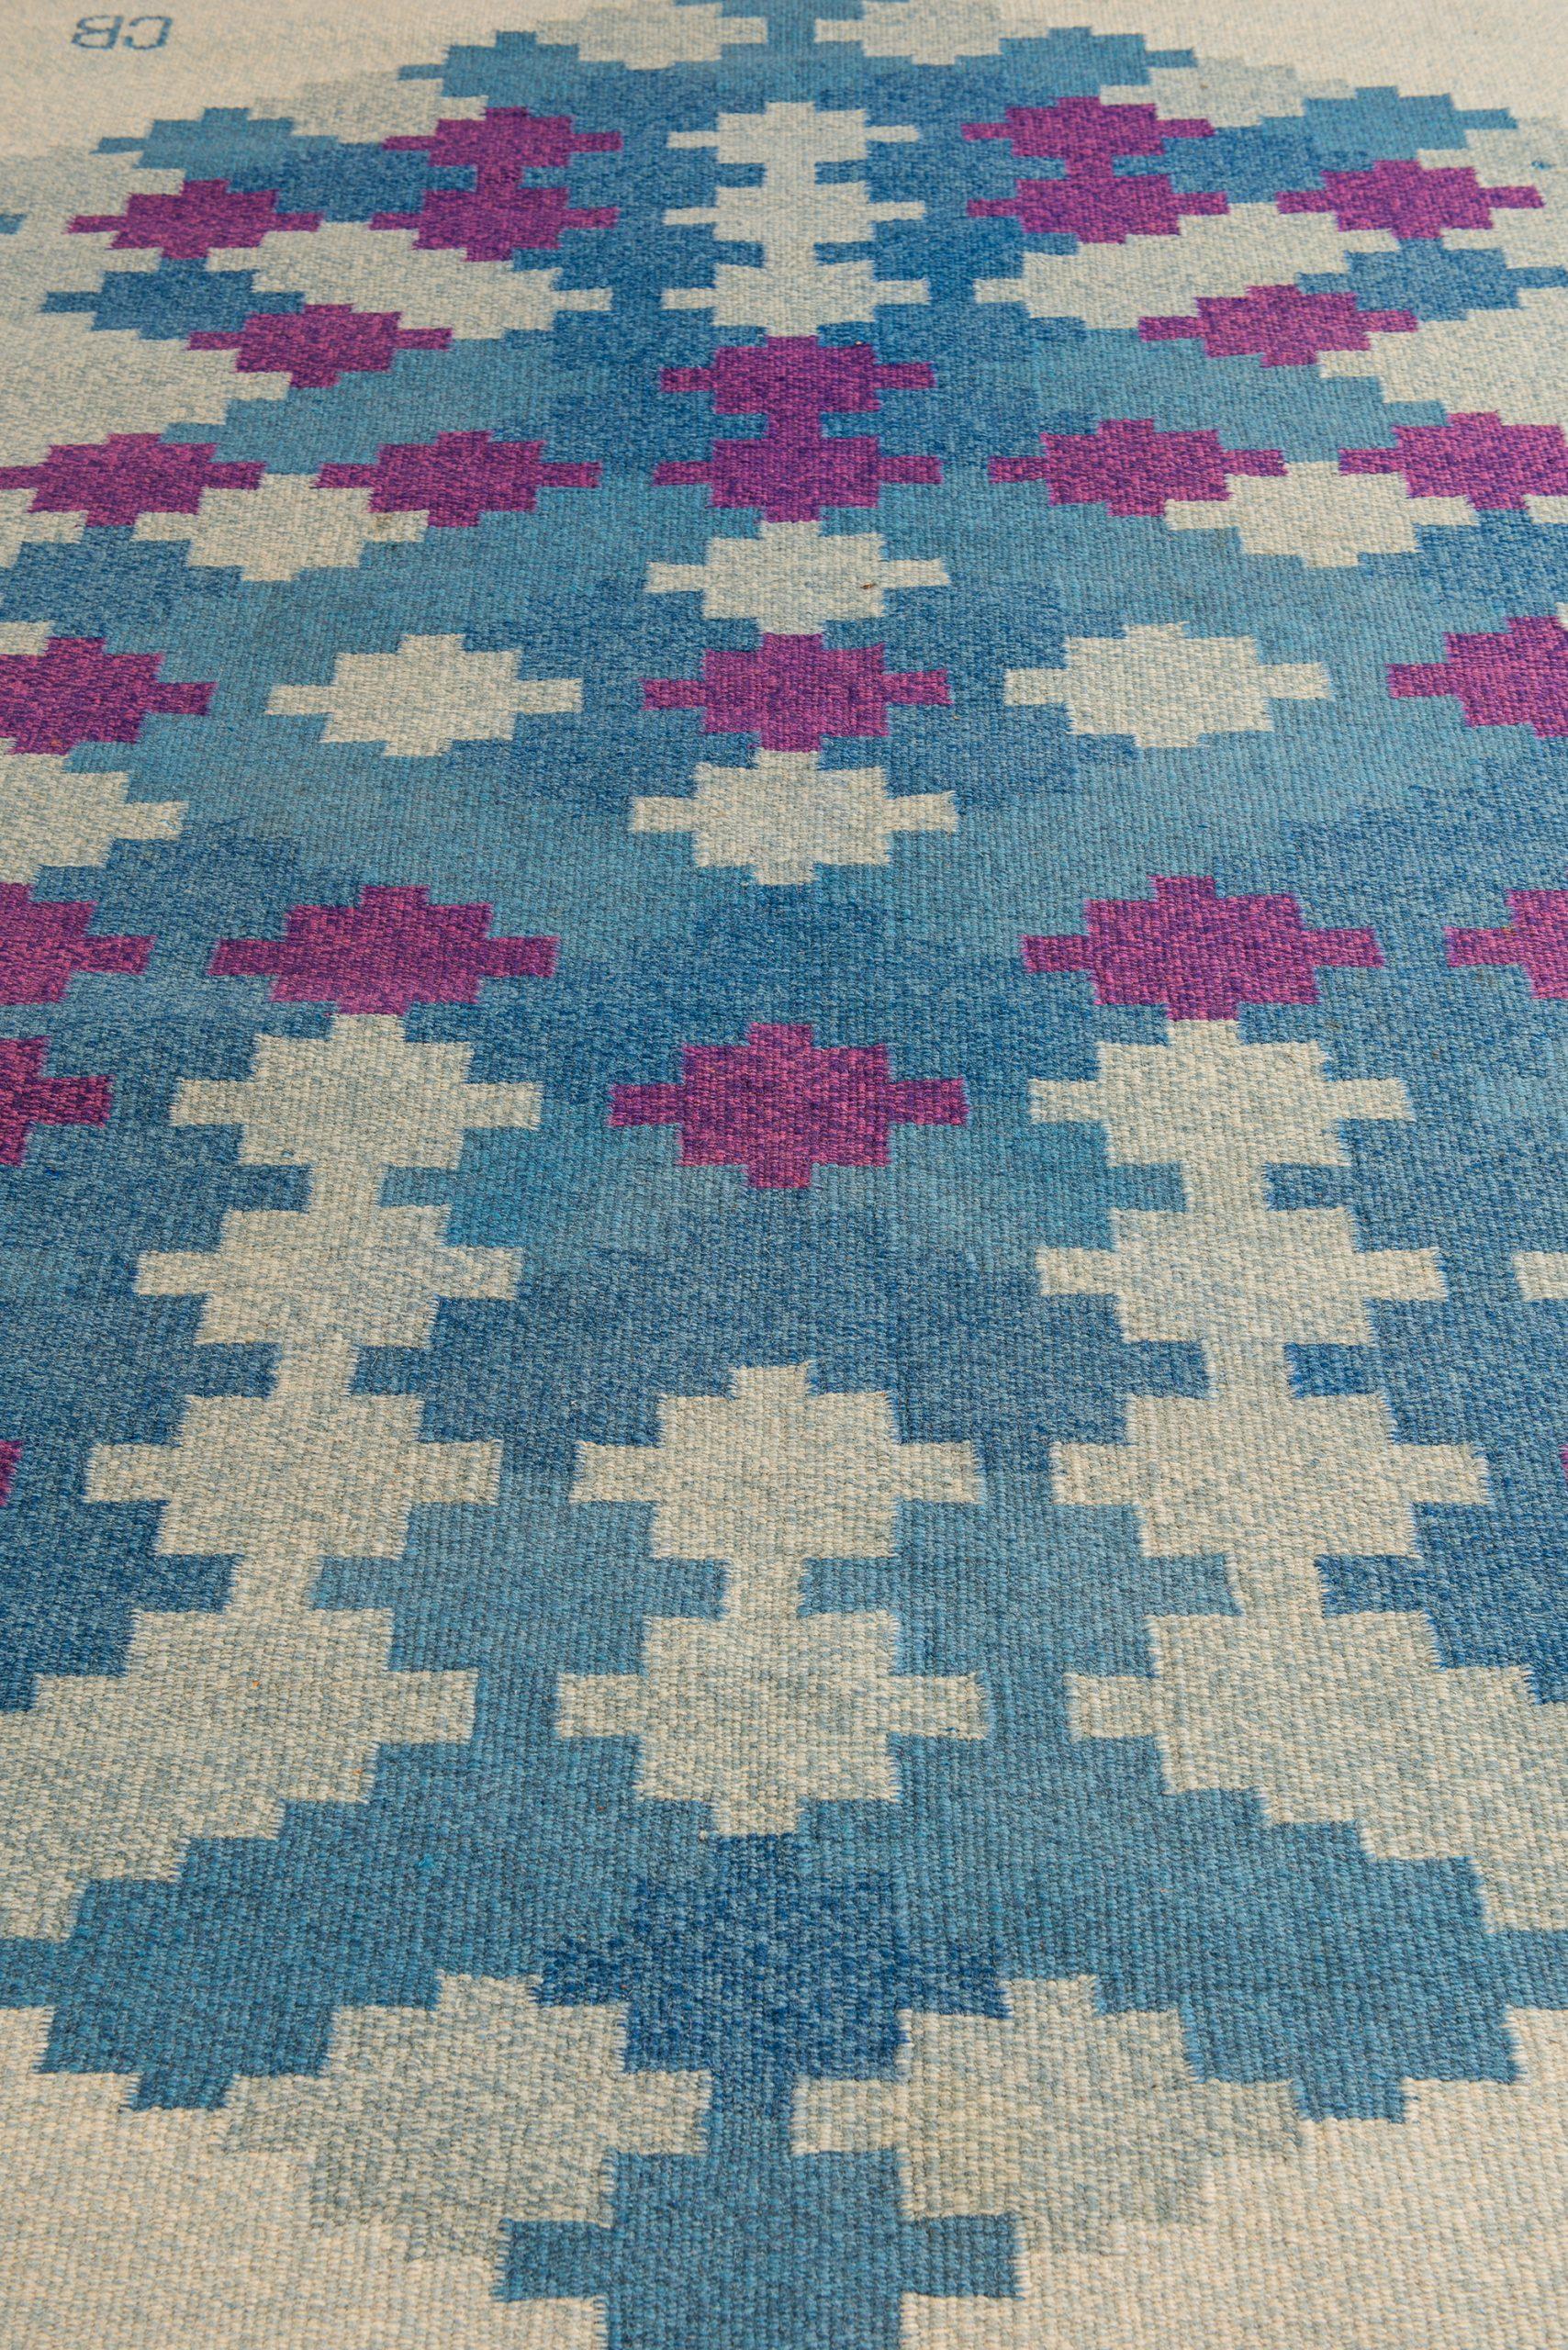 Mid-20th Century Flatweave Carpet Produced in Sweden